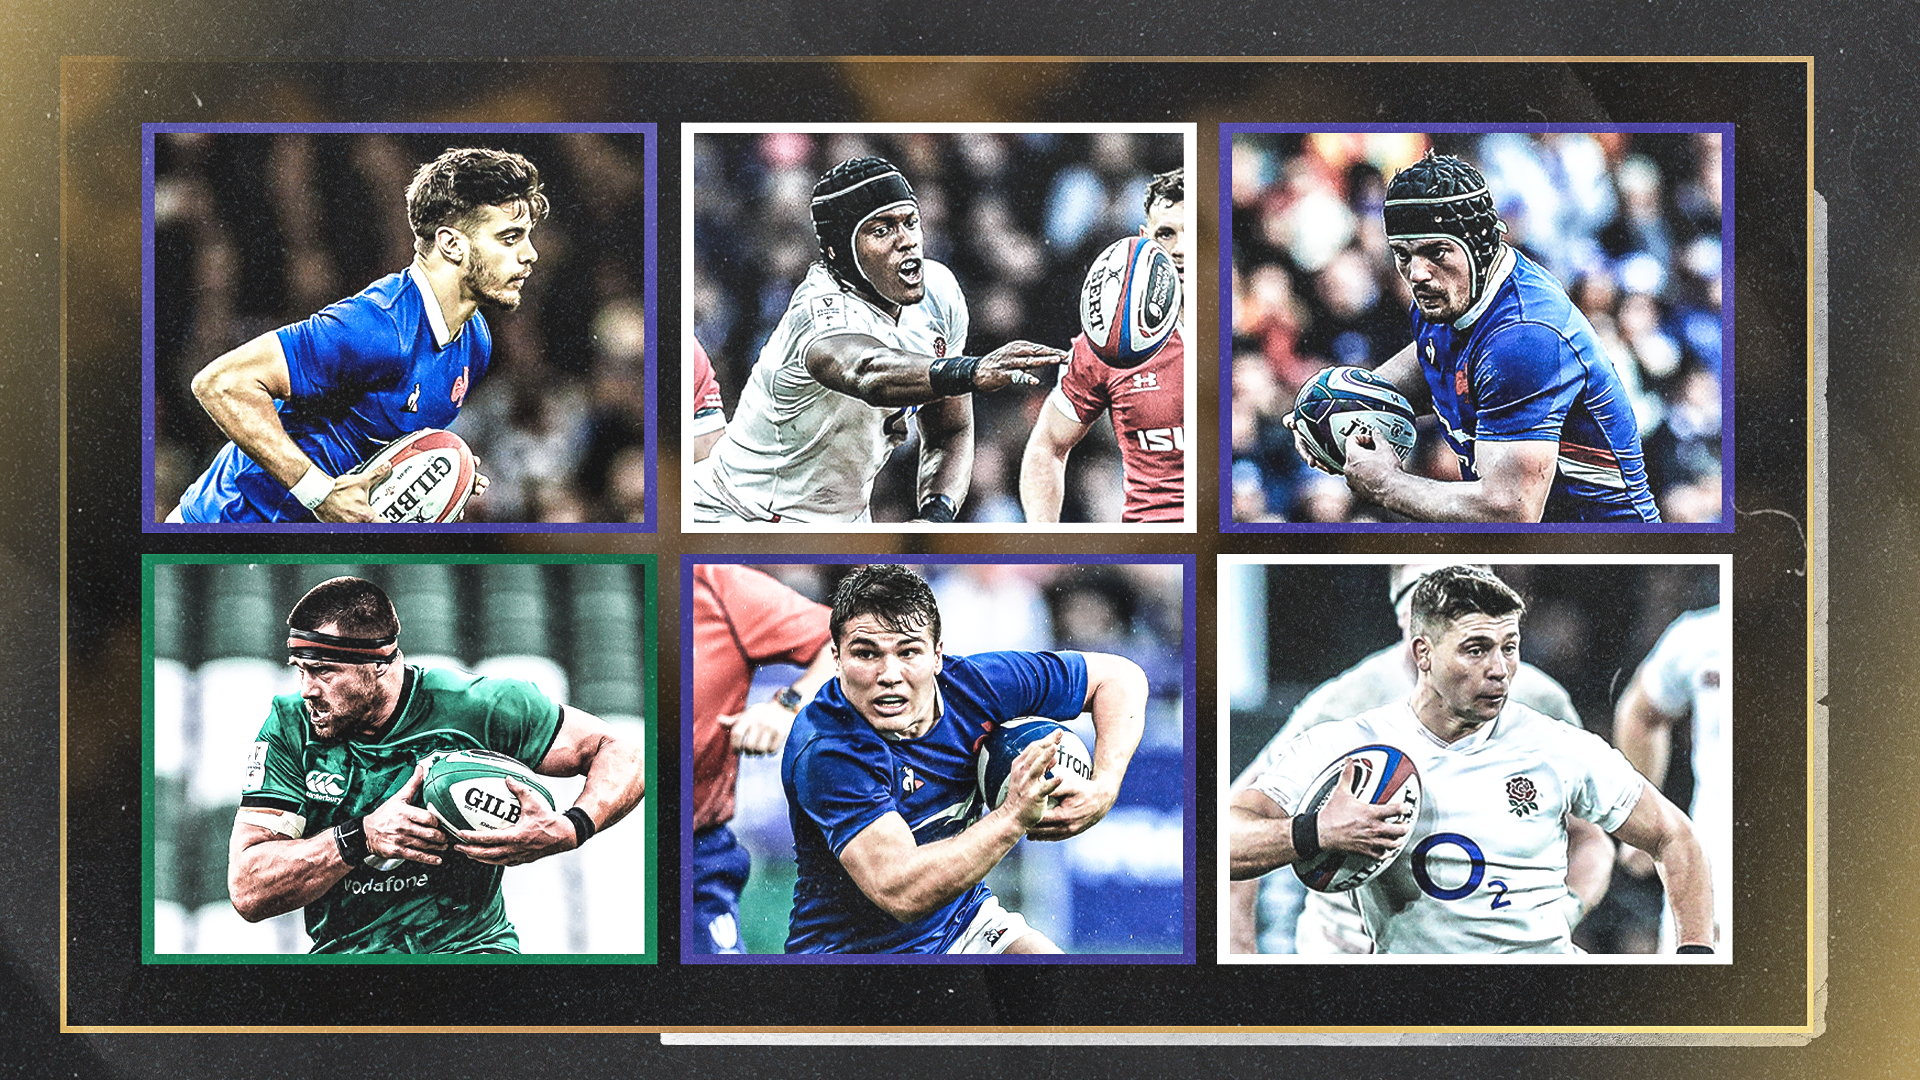 www.sixnationsrugby.com